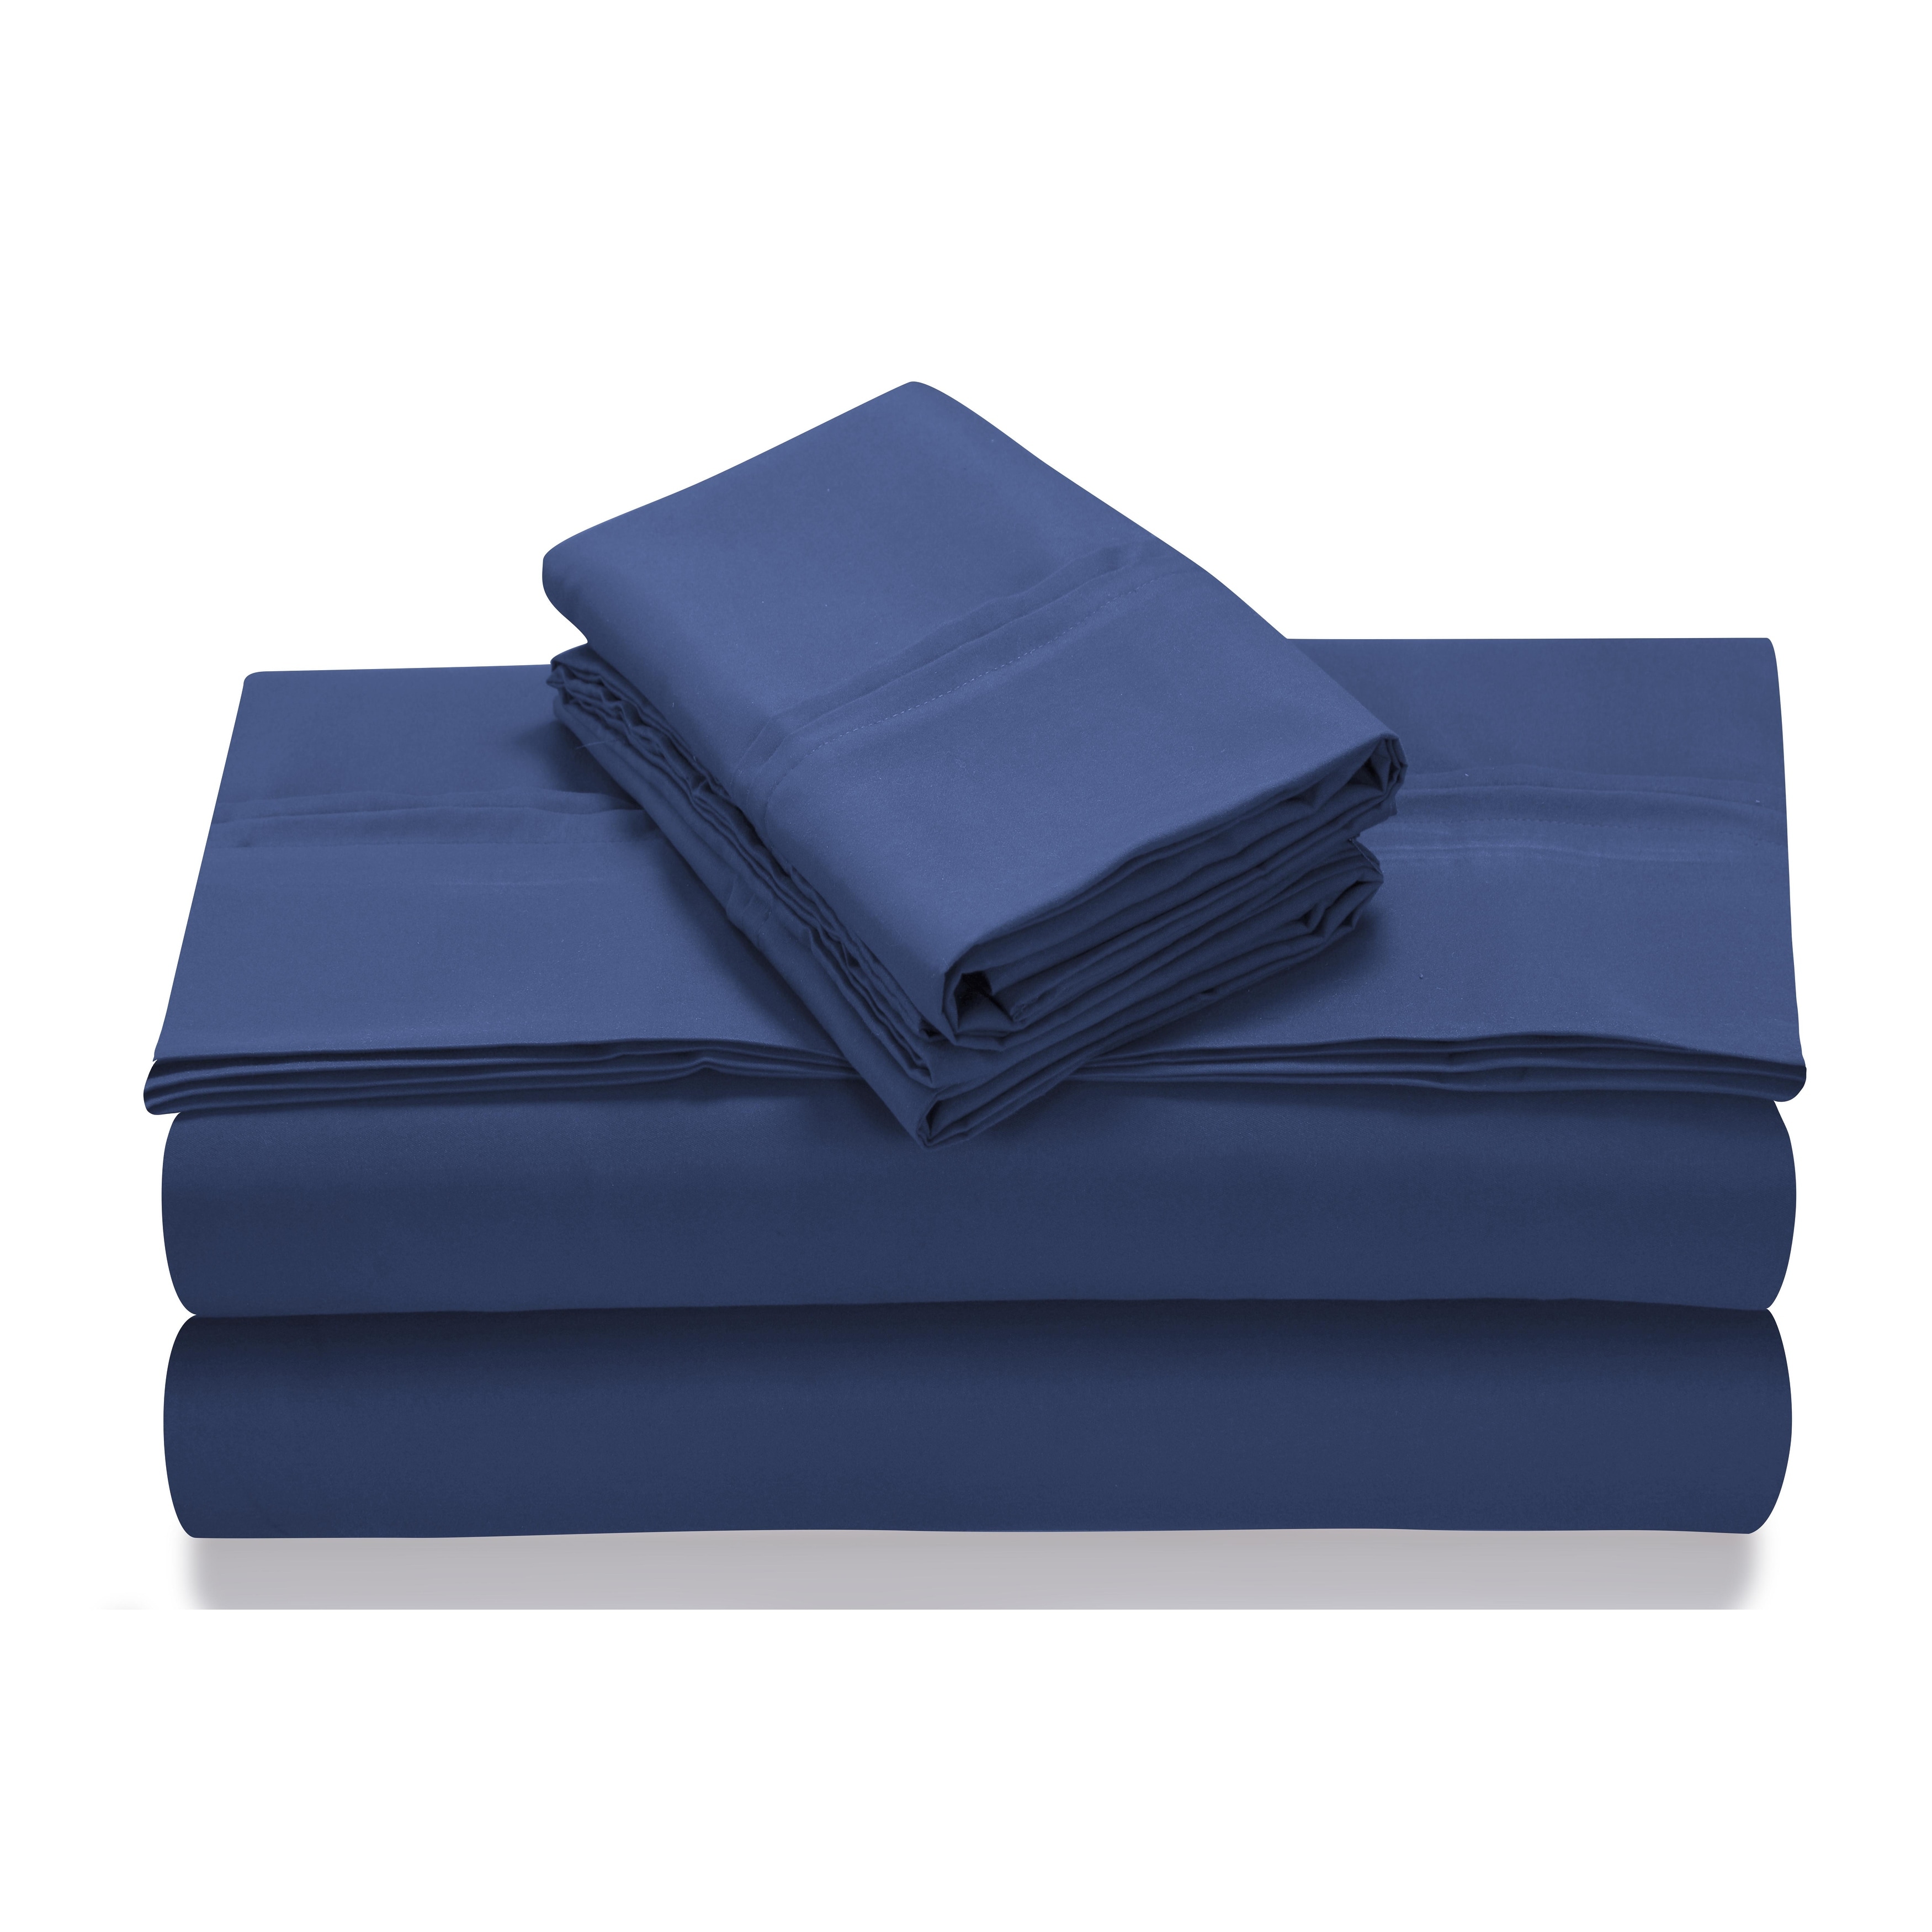 https://ak1.ostkcdn.com/images/products/is/images/direct/5ab10101bae1e862fc0906bc3368810dee34cd7b/Super-Soft-Extra-Deep-Pocket-Bed-Sheet-Set-with-Oversize-Flat.jpg